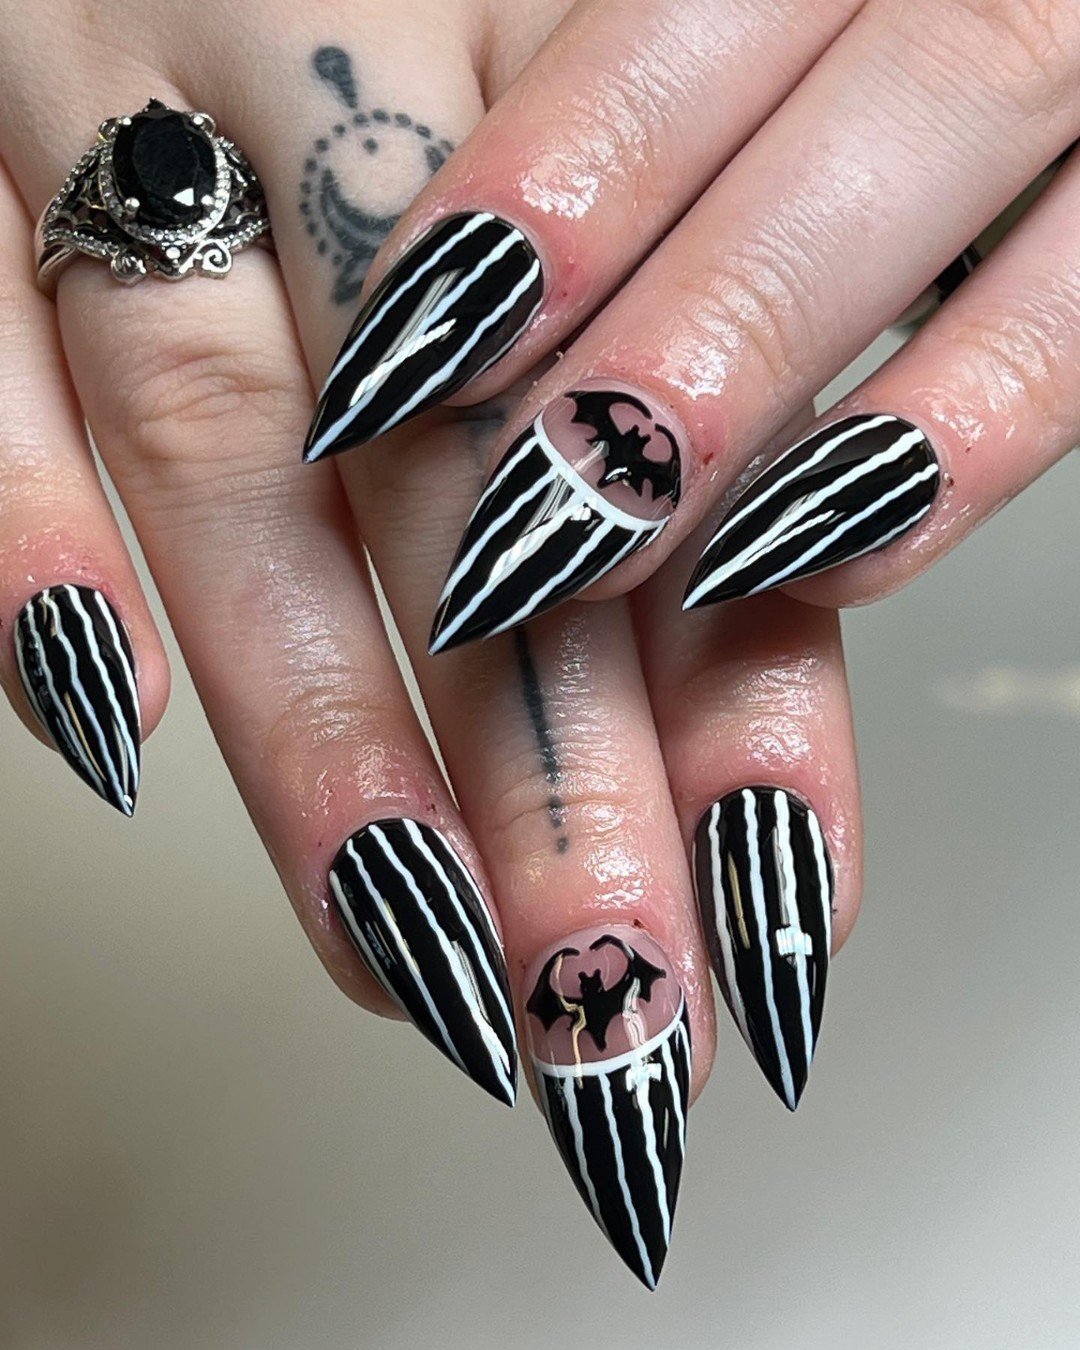 2 - Picture of Black Nails